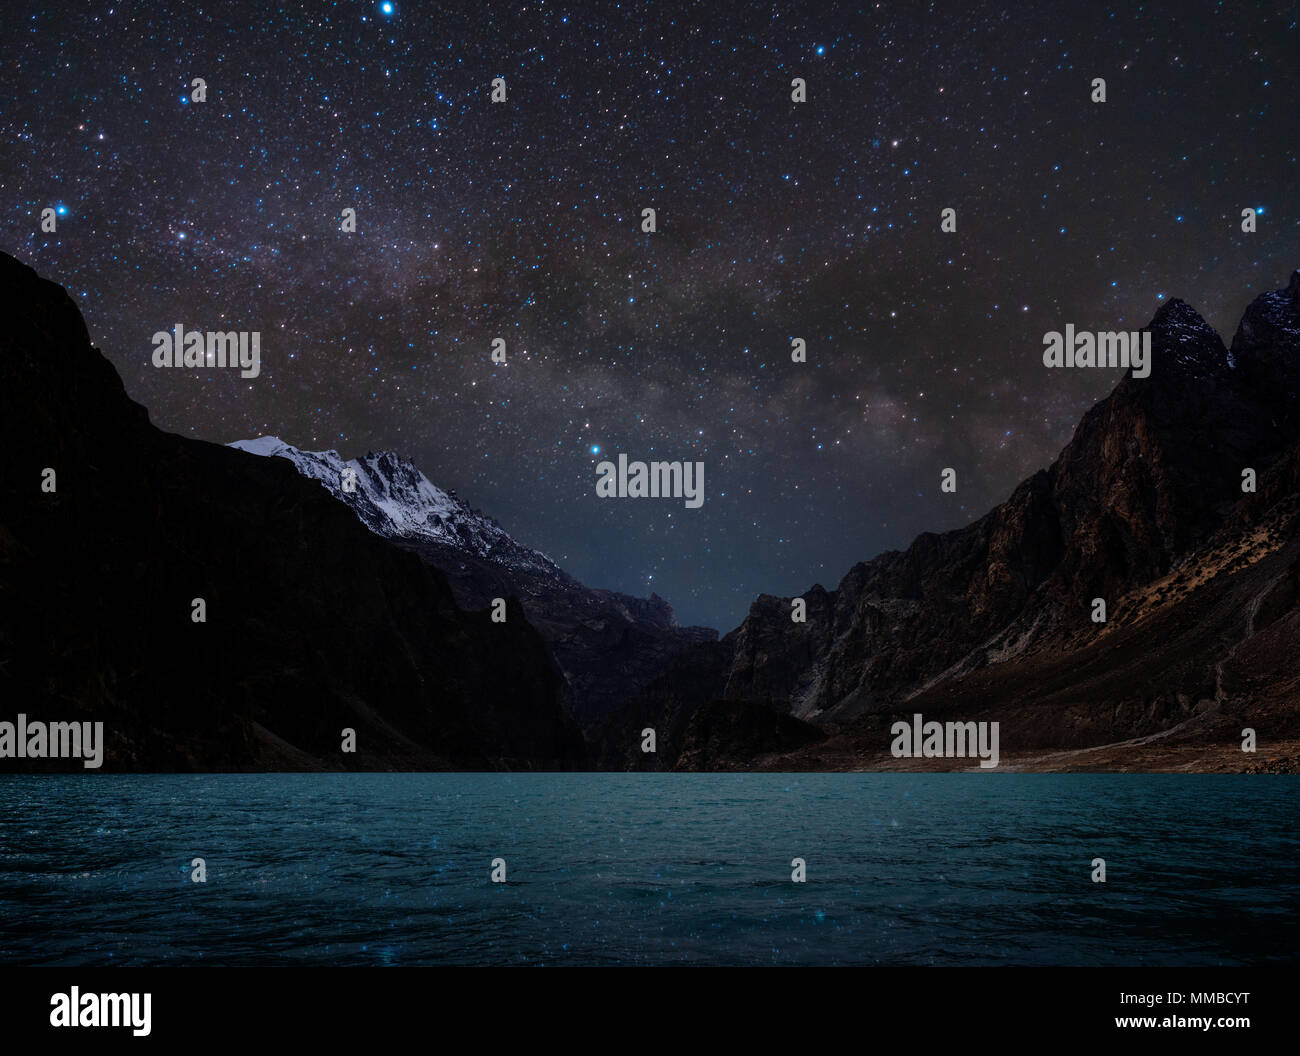 Night Landscape, Silhouette mountain with water on lake and sky full of star with milky way Stock Photo